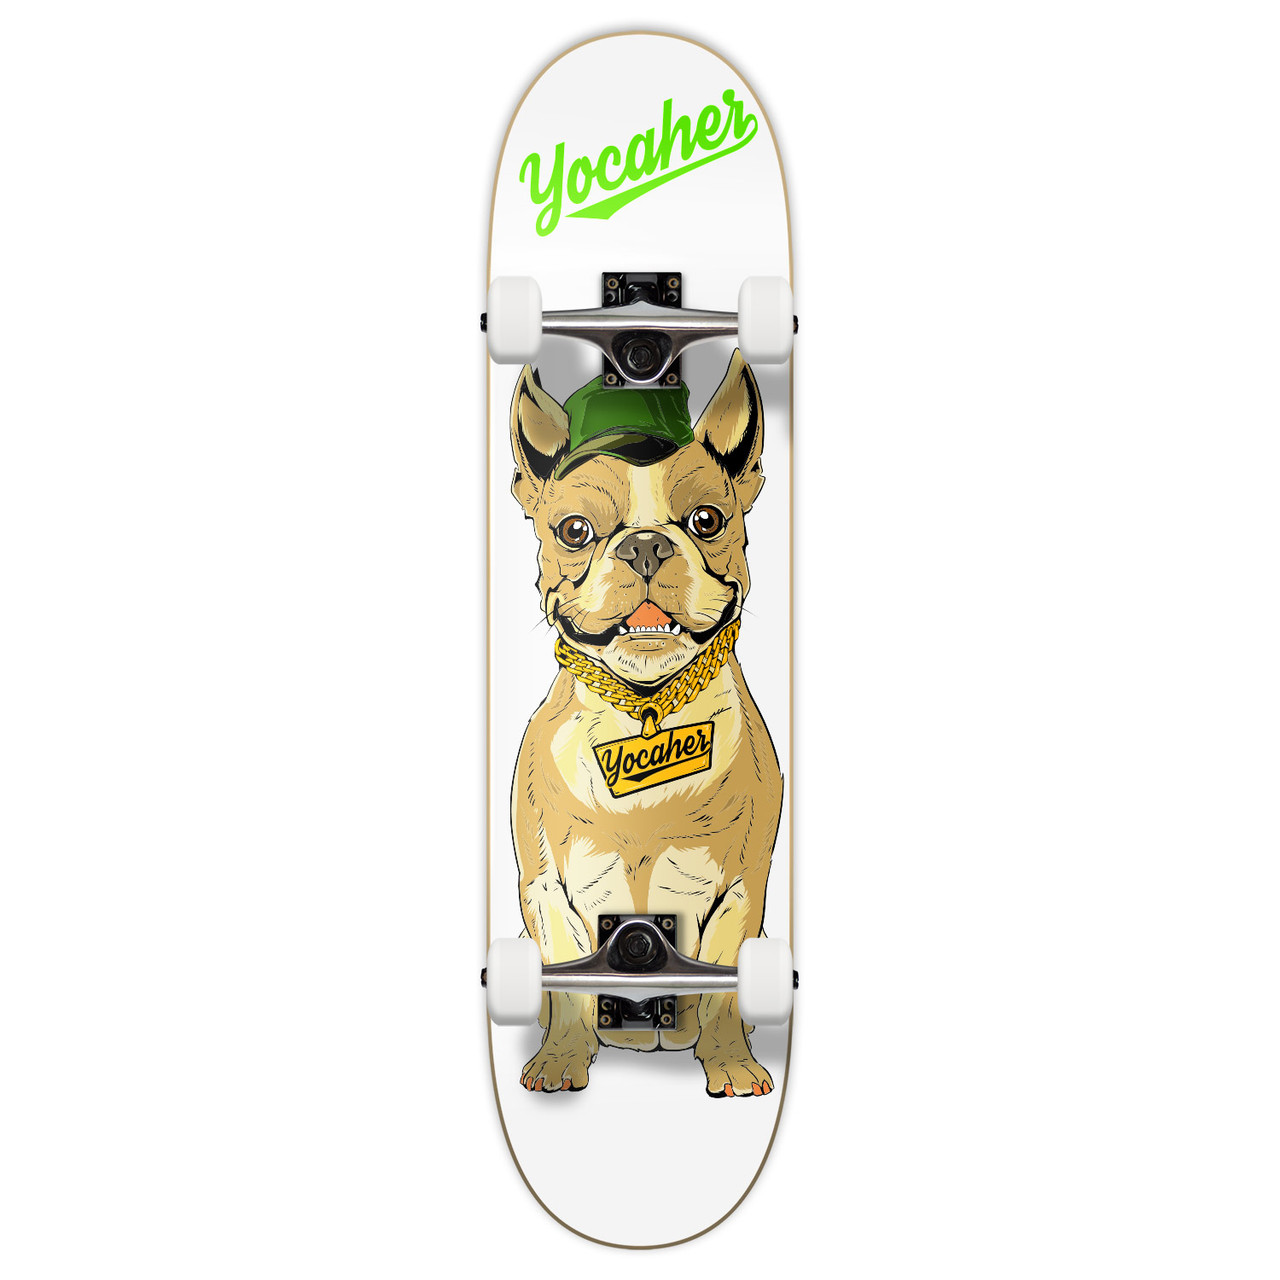 Yocaher Complete Skateboard 7.75